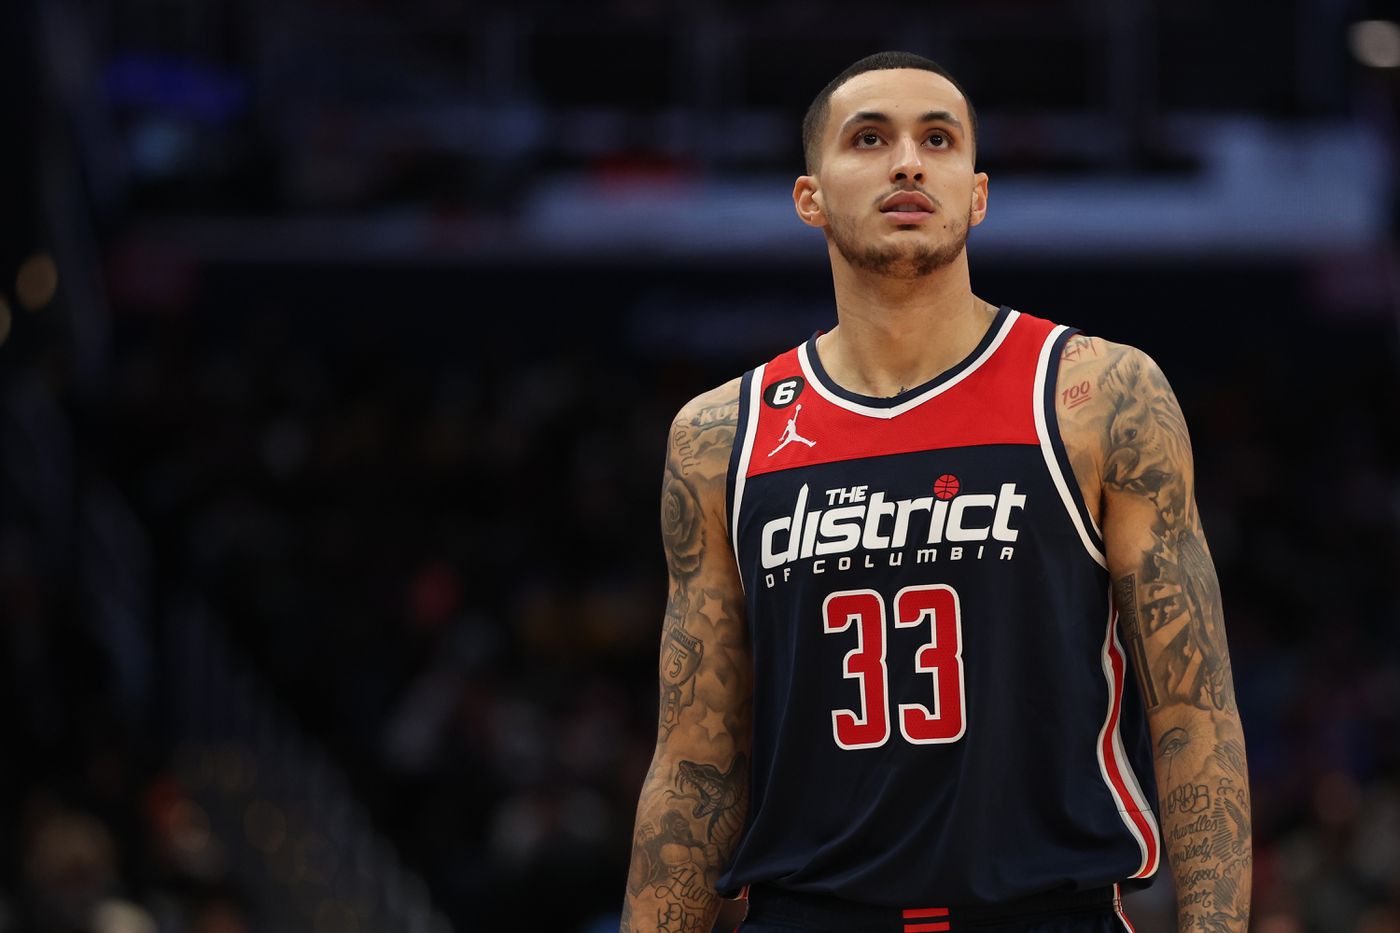 NBA:Ranking all of the Wizards' jerseys from this year - Bullets